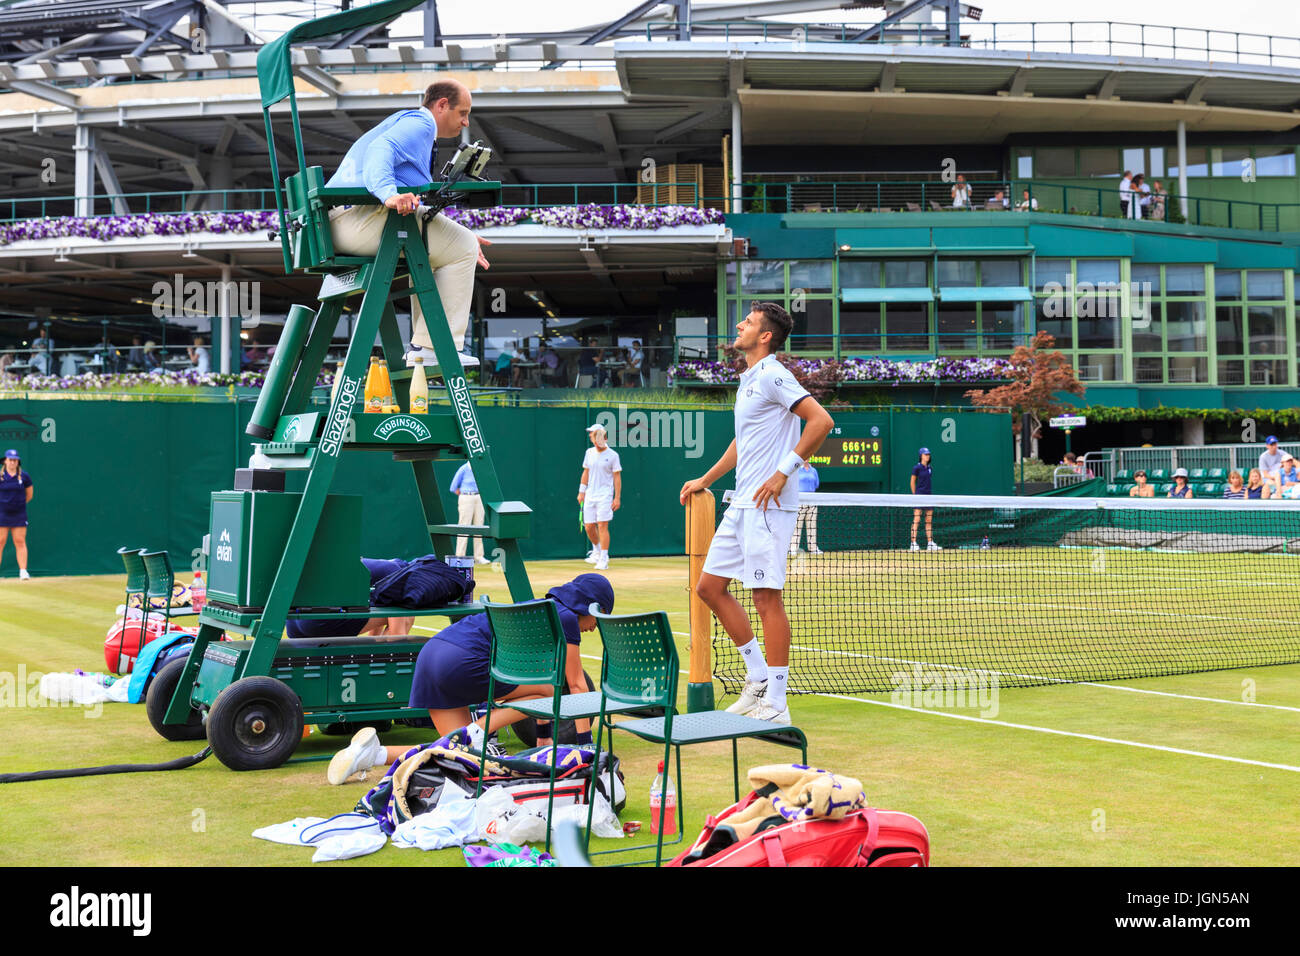 Croatian player Mate Pavic argues with the chair umpire during a men's doubles match at the Wimbledon Tennis Championships 2017, All England Lawn Tenn Stock Photo